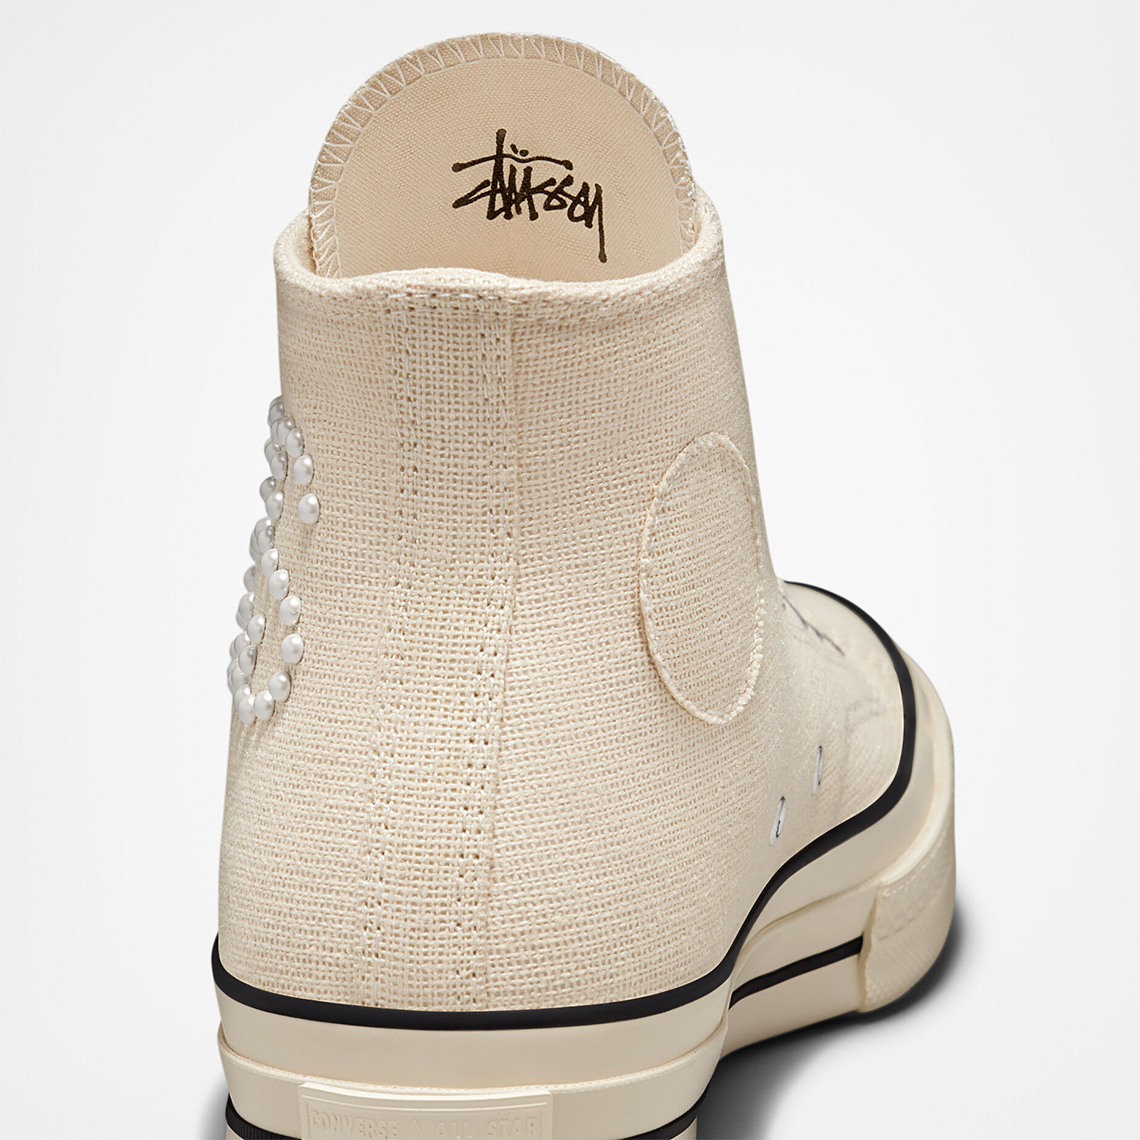 Stüssy and Converse Chuck 70 Fossil Is Their Best Collab Yet